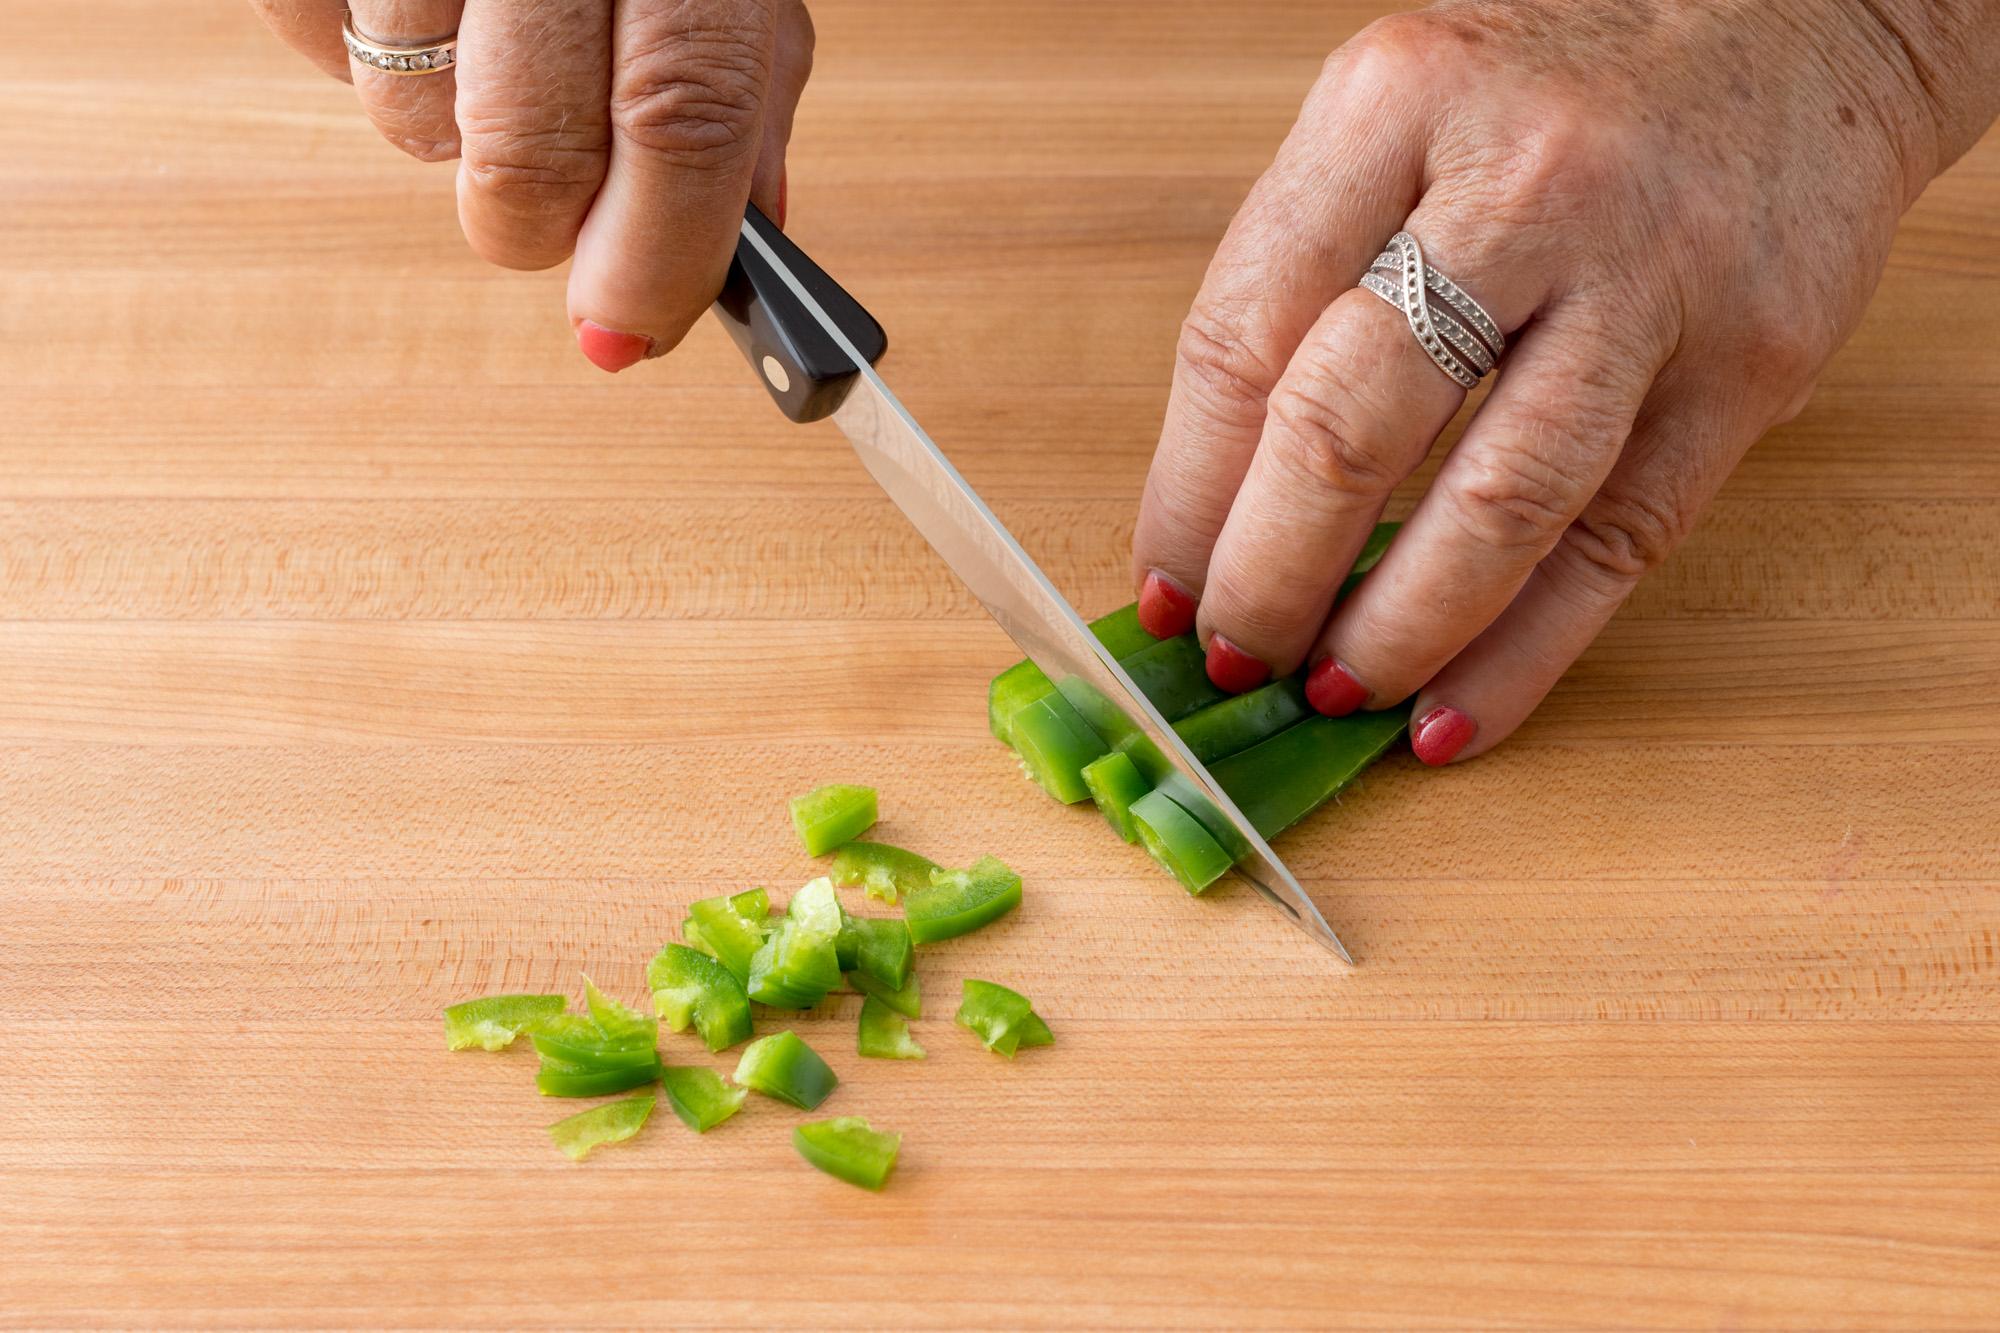 Use the 4 Inch Gourmet Paring Knife to mince the jalapeno.